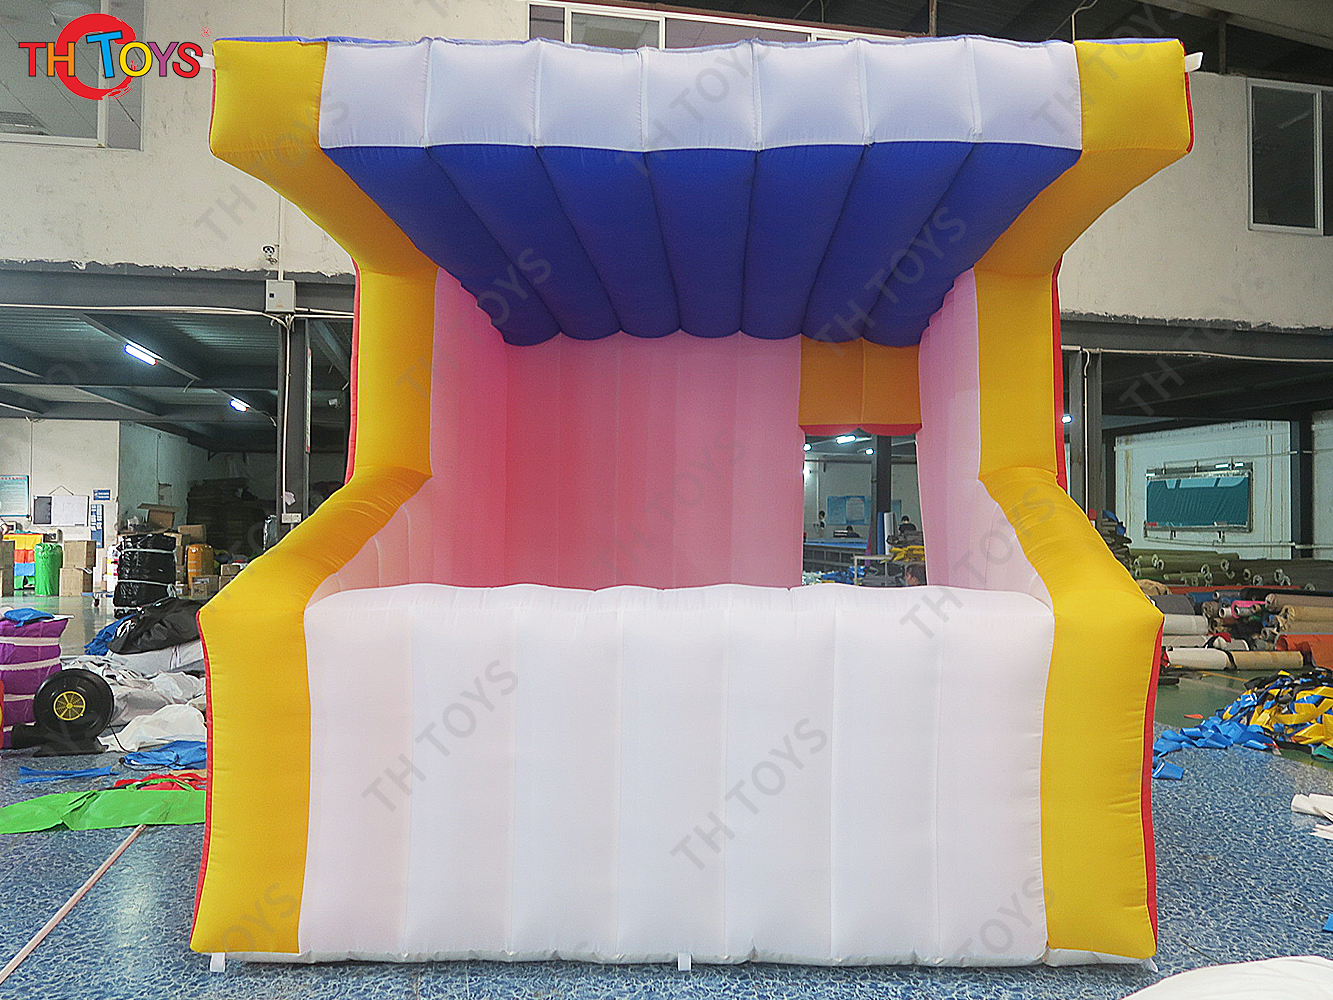 inflatable snack booth drinnks & food selling stand for outdoor carnival activities parties promotions